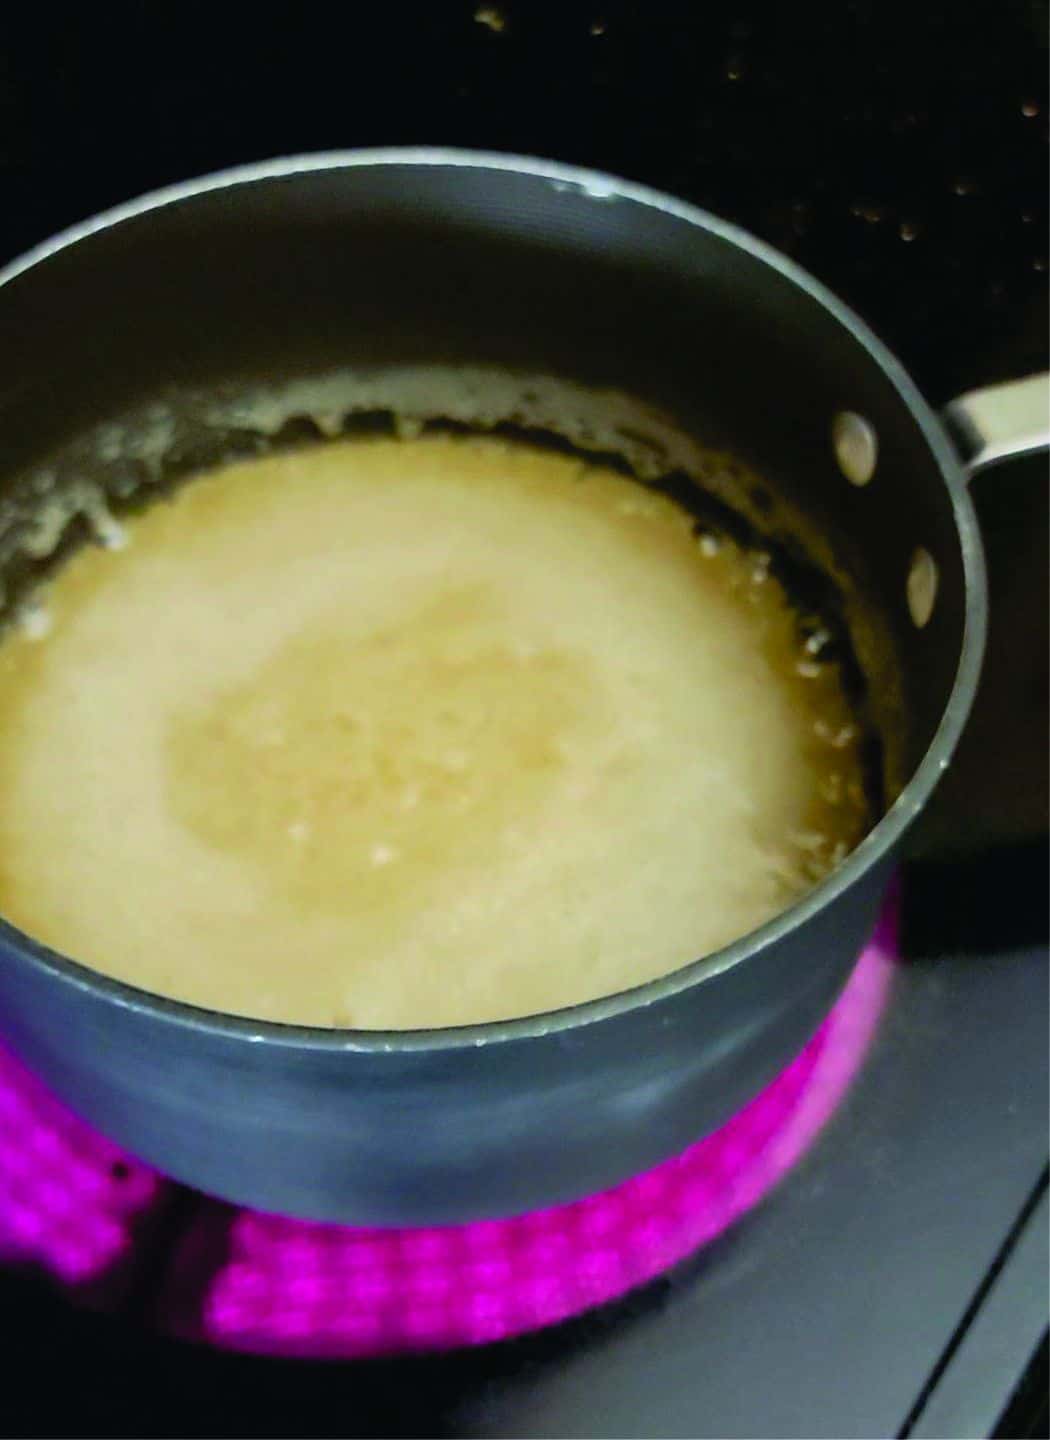 heating sugar and corn syrup over a stovetop